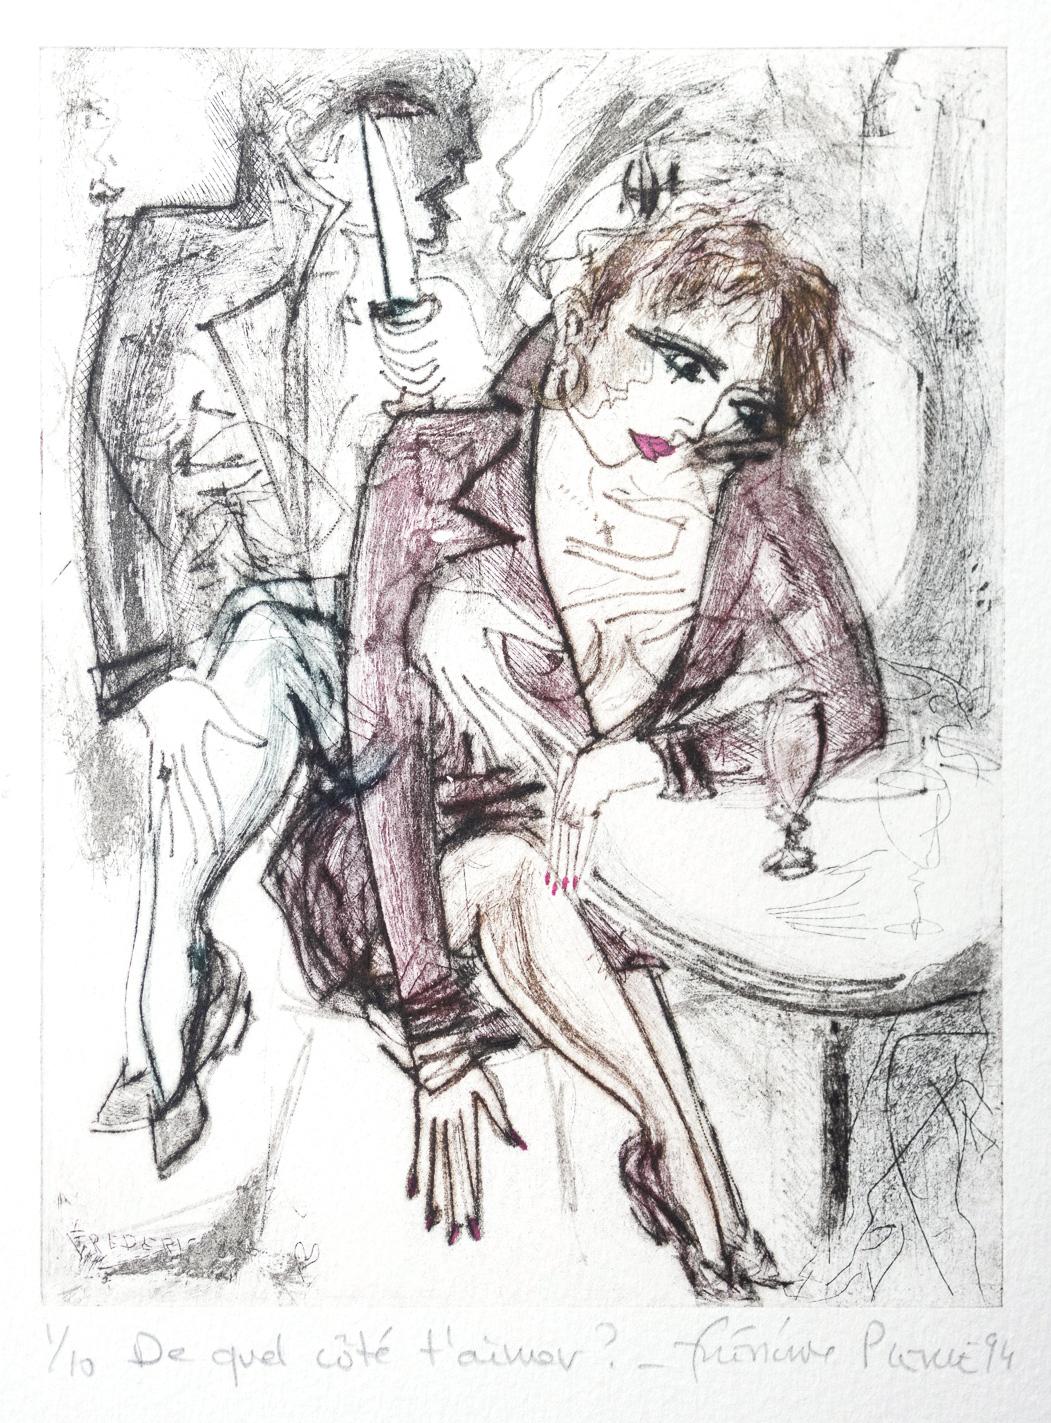 Frédéric Pierre Figurative Art - "Which side do you like?" - Frederic Pierre Figurative Lithograph